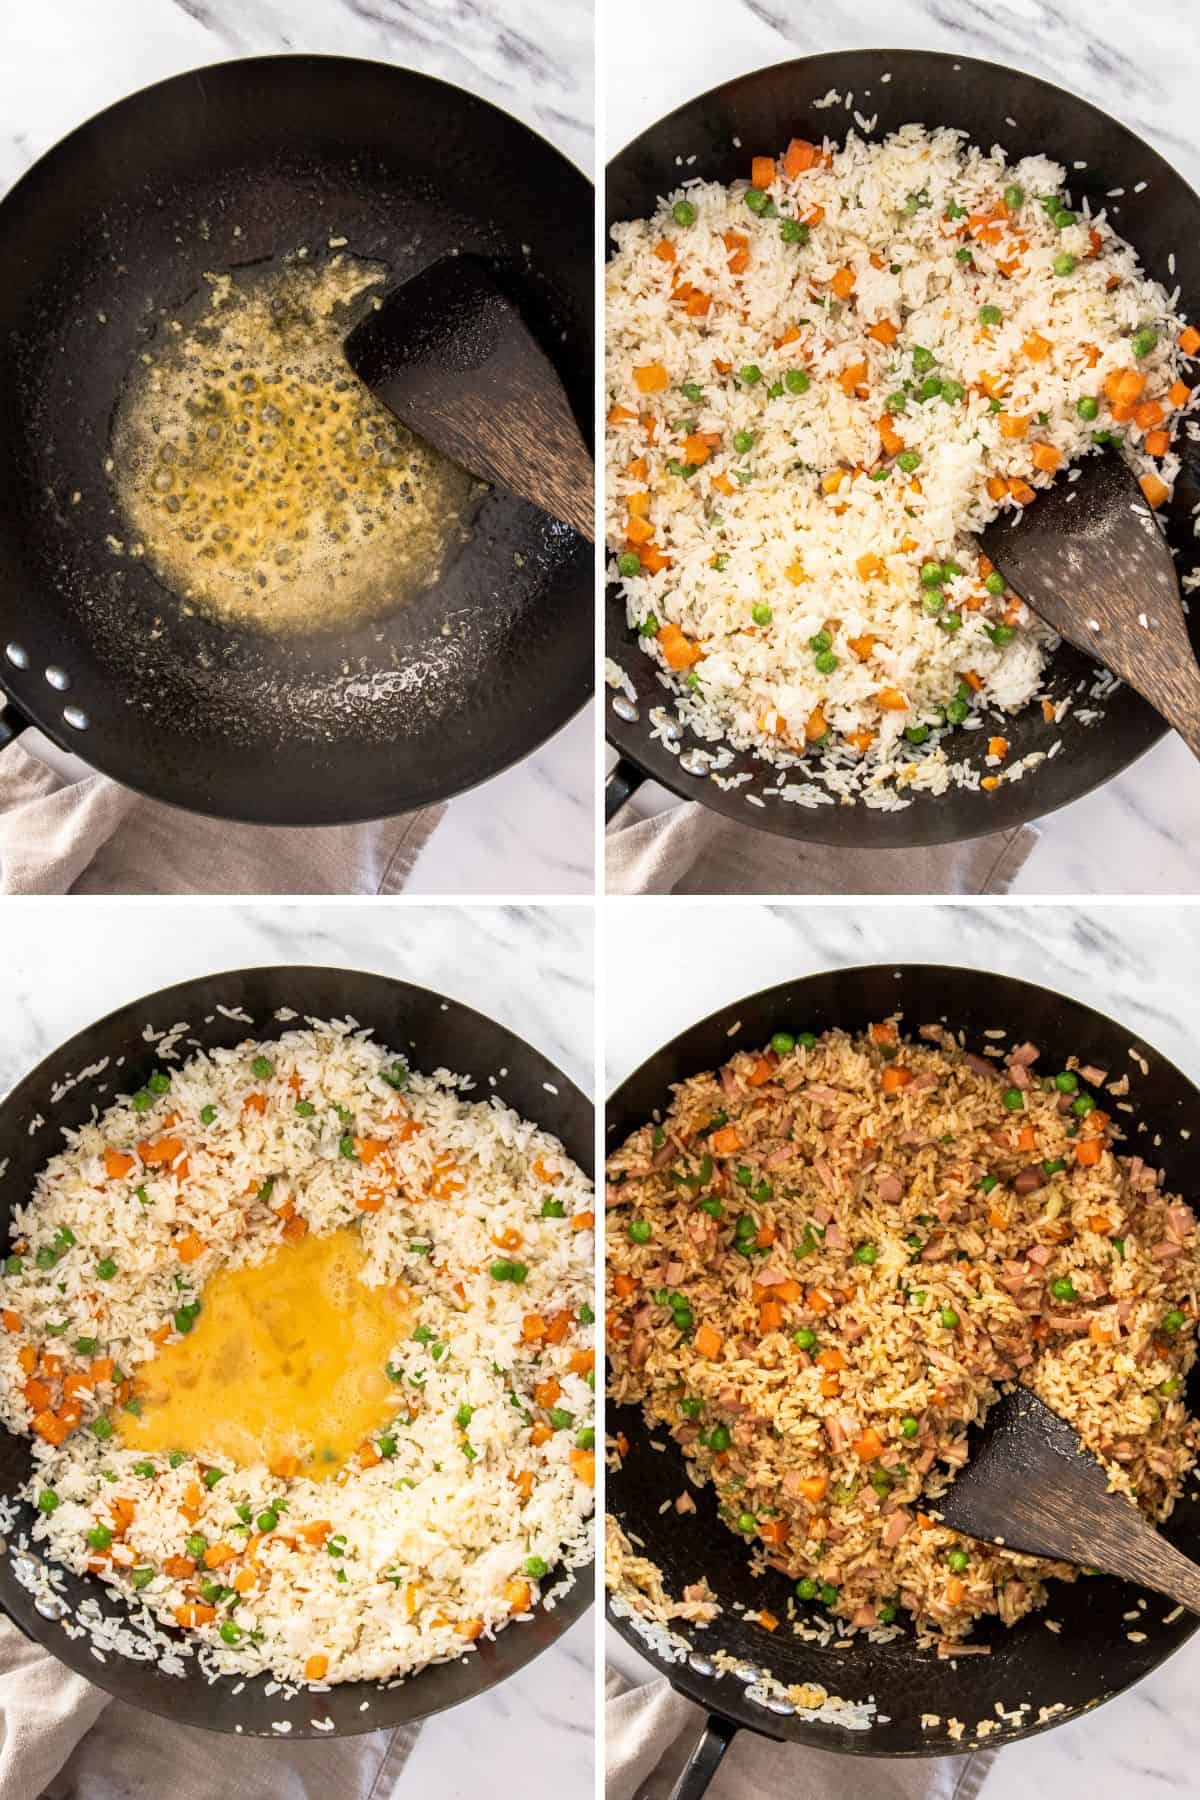 4 photos showing how to make fried rice with leftover ham.